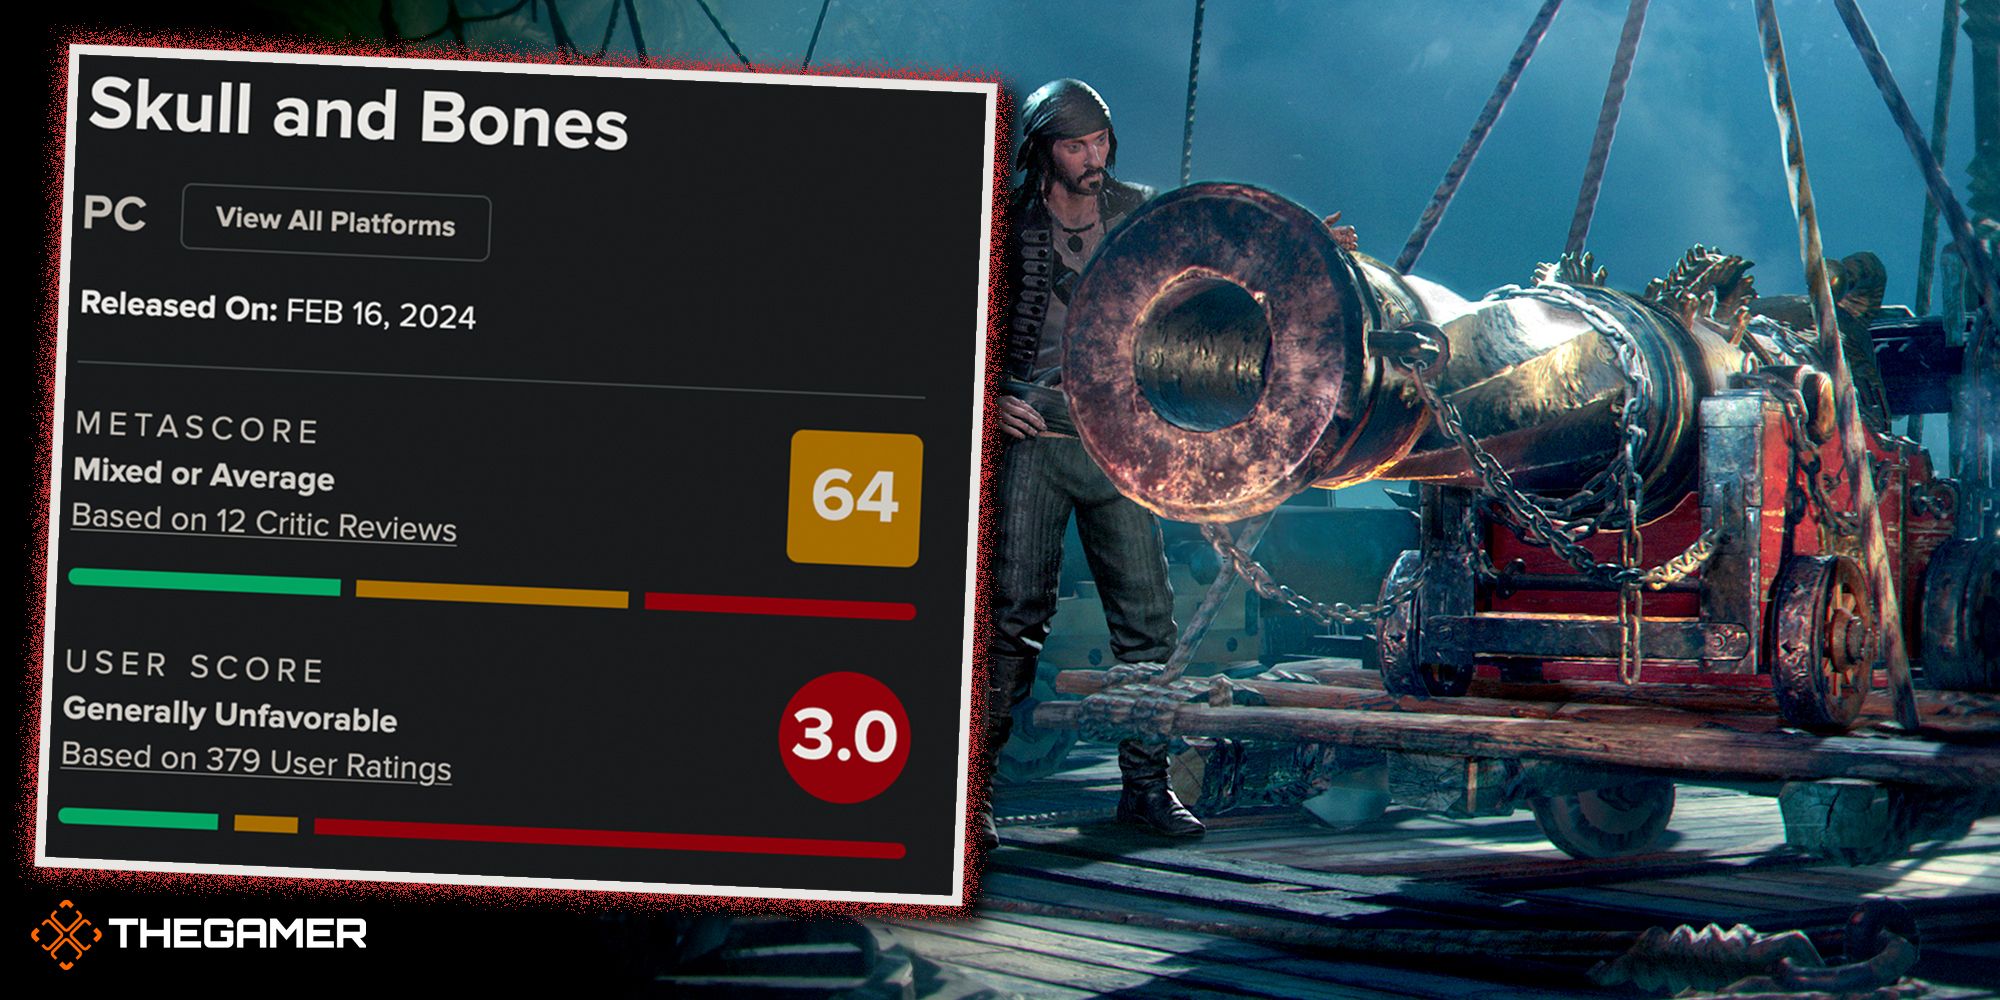 The metacritic scores of Skull & Bones on the left (64 critic and 3.0 user) and a pirate with a big cannon on the right